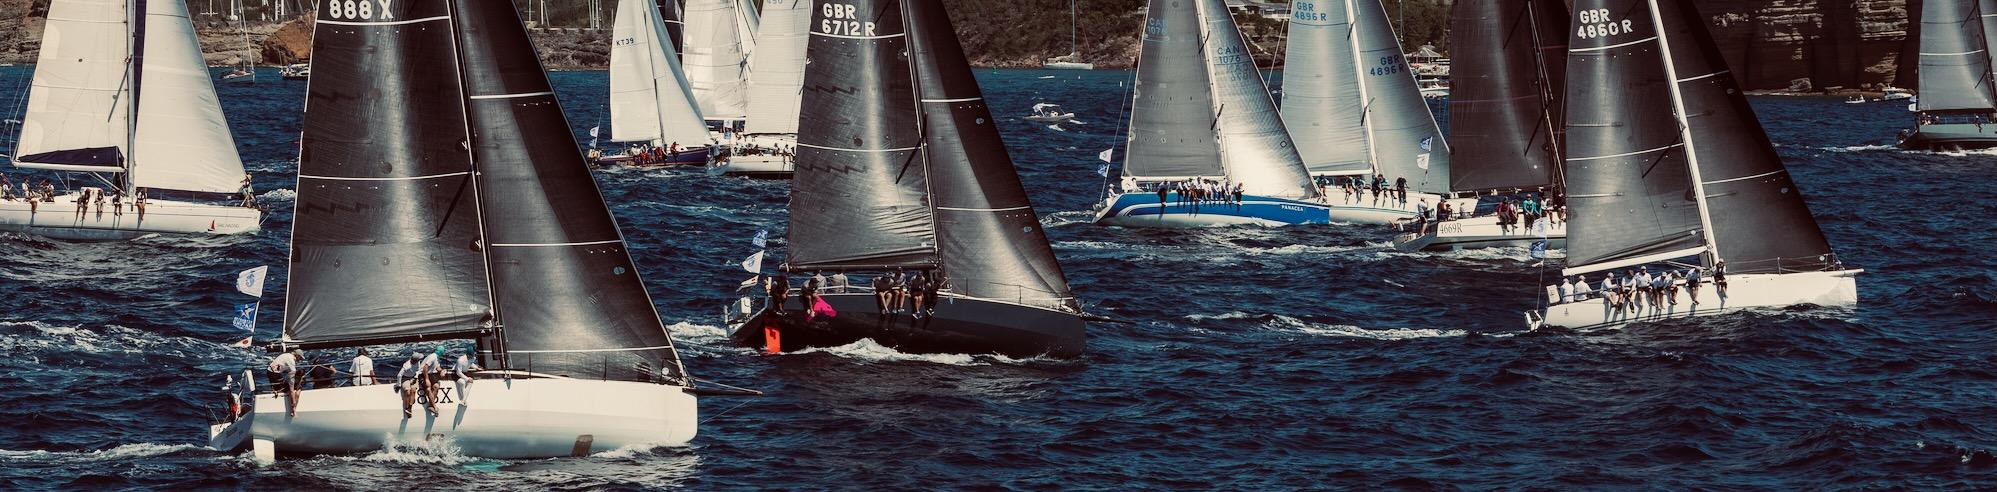 The 15th edition of the RORC Caribbean 600 started in glorious conditions on Monday 19th February off Fort Charlotte Antigua. Sixty-four boats with over 500 sailors from all over the world took to the start for the non-stop 600nm race around 11 Caribbean islands. The south easterly breeze gusting up to 17 knots produced a fast start to the Caribbean classic. © Tim Wight/RORC